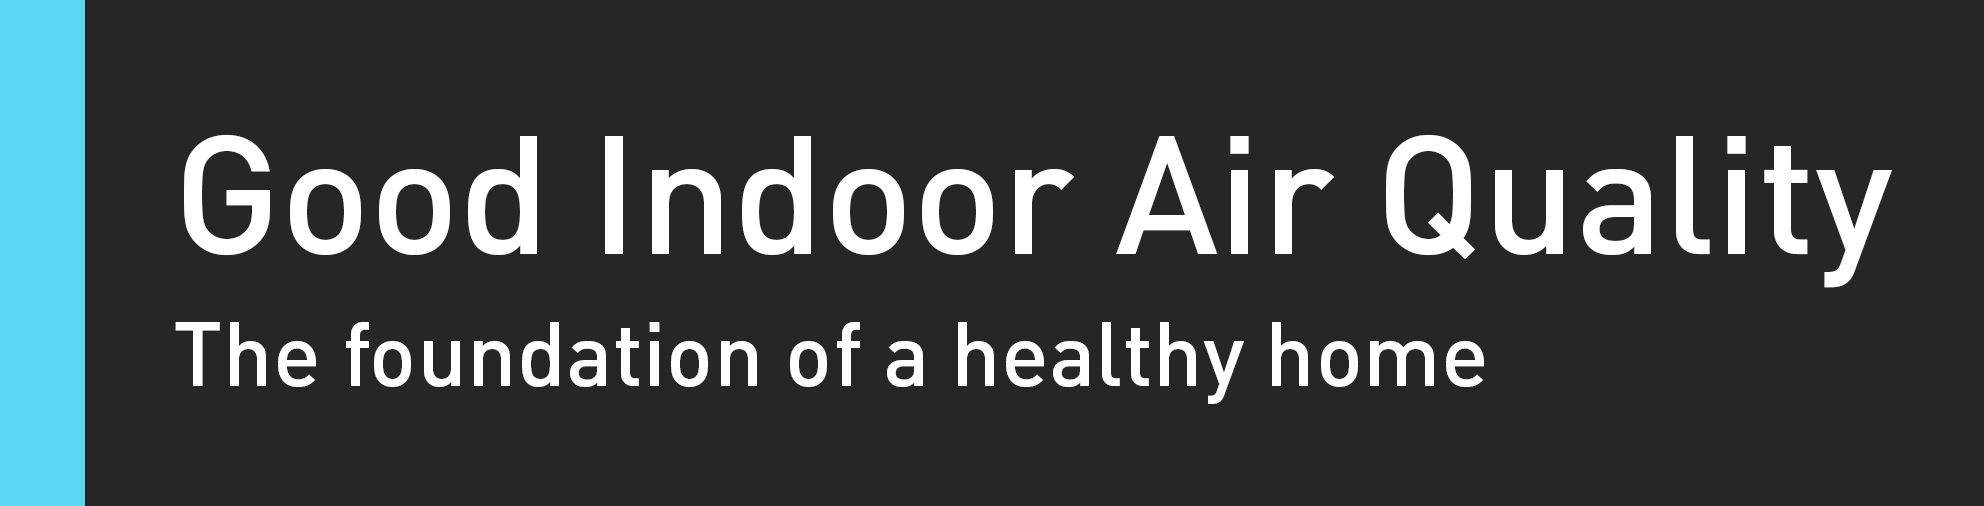 Good Indoor Air Quality image